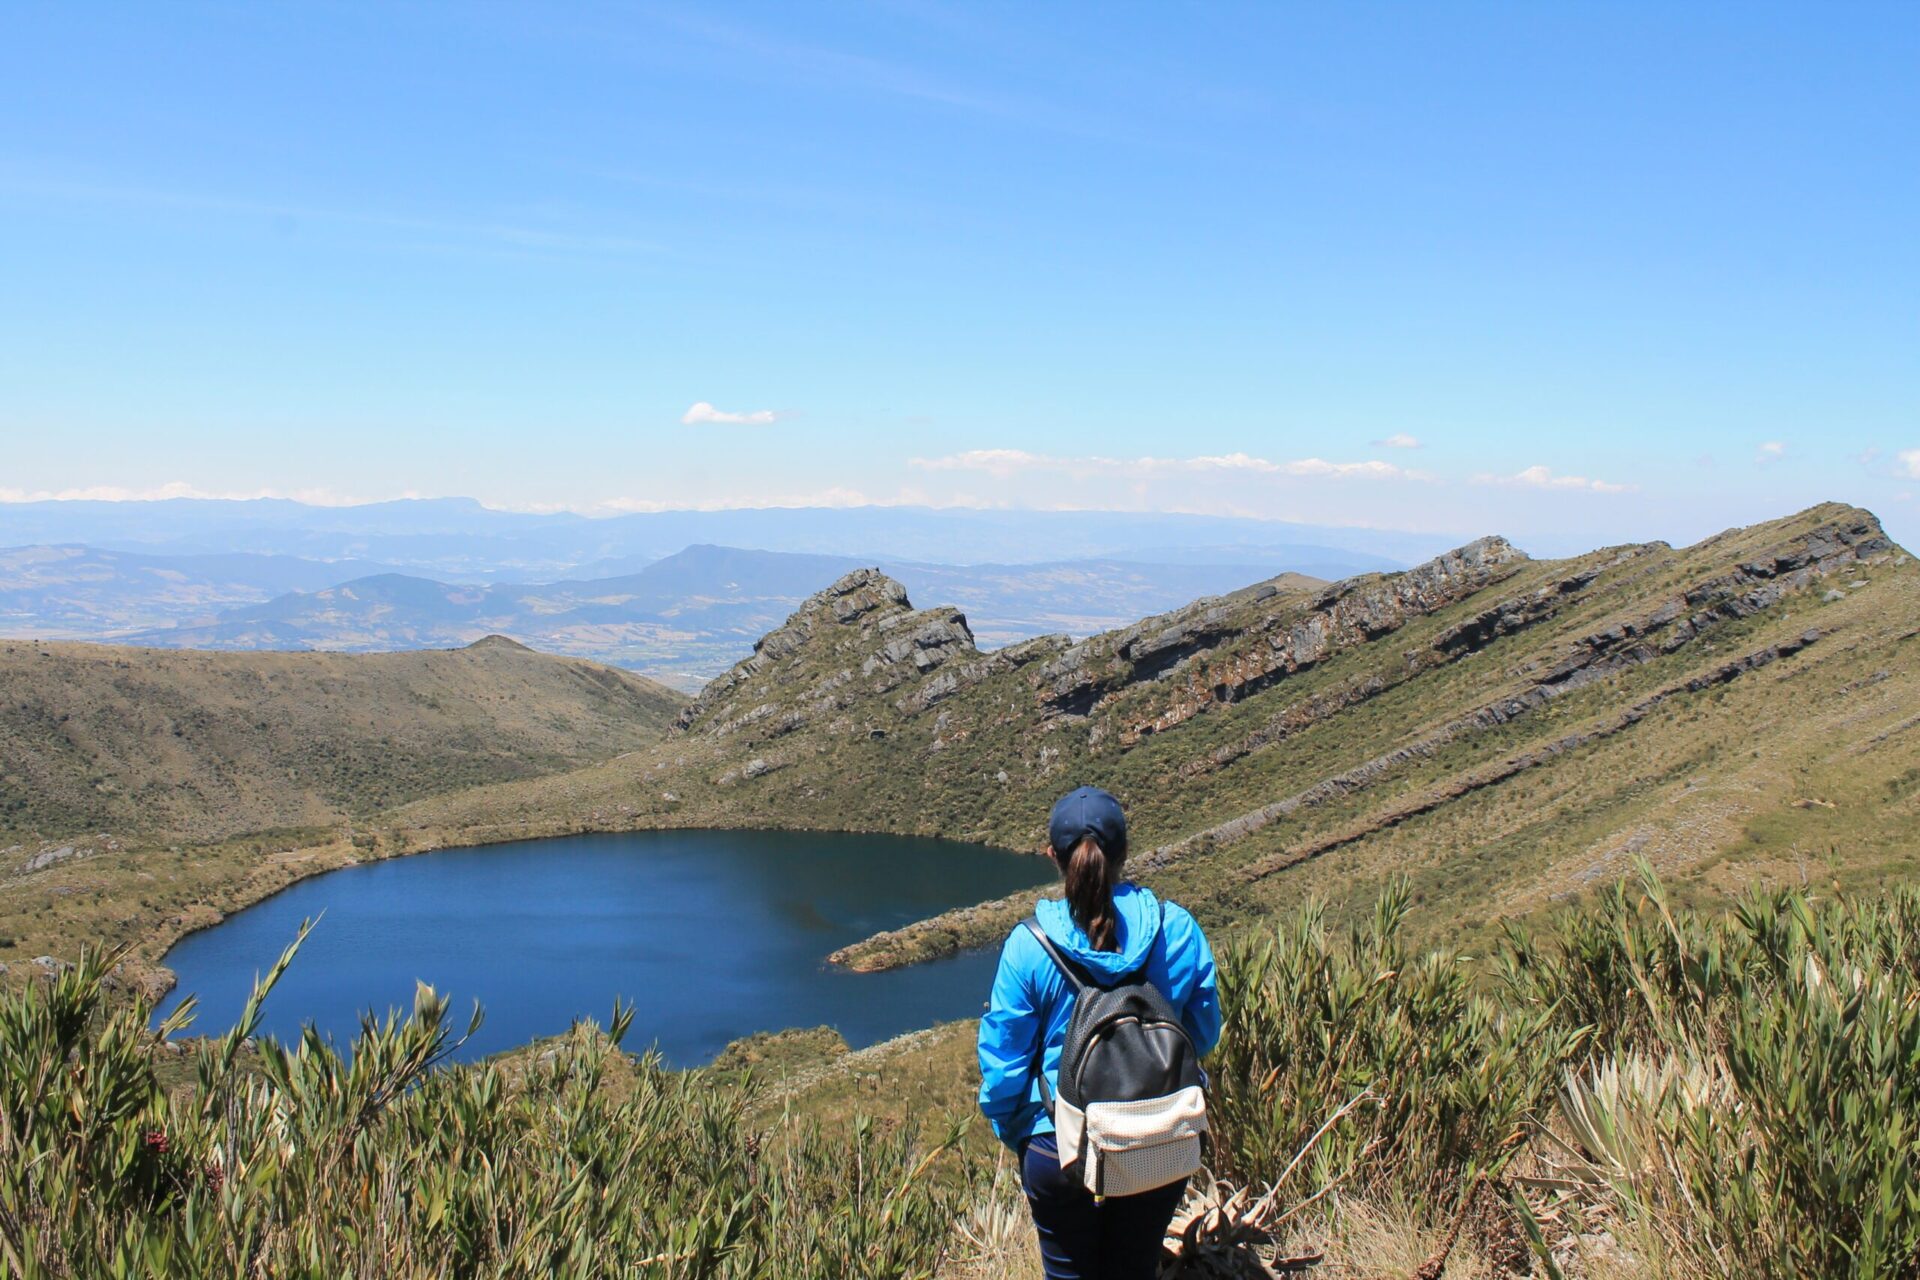 Chingaza: A person wearing a blue jacket and backpack is standing on a grassy hillside overlooking a lake surrounded by mountains under a clear blue sky, possibly reminiscing about their recent Bogotá city tours.